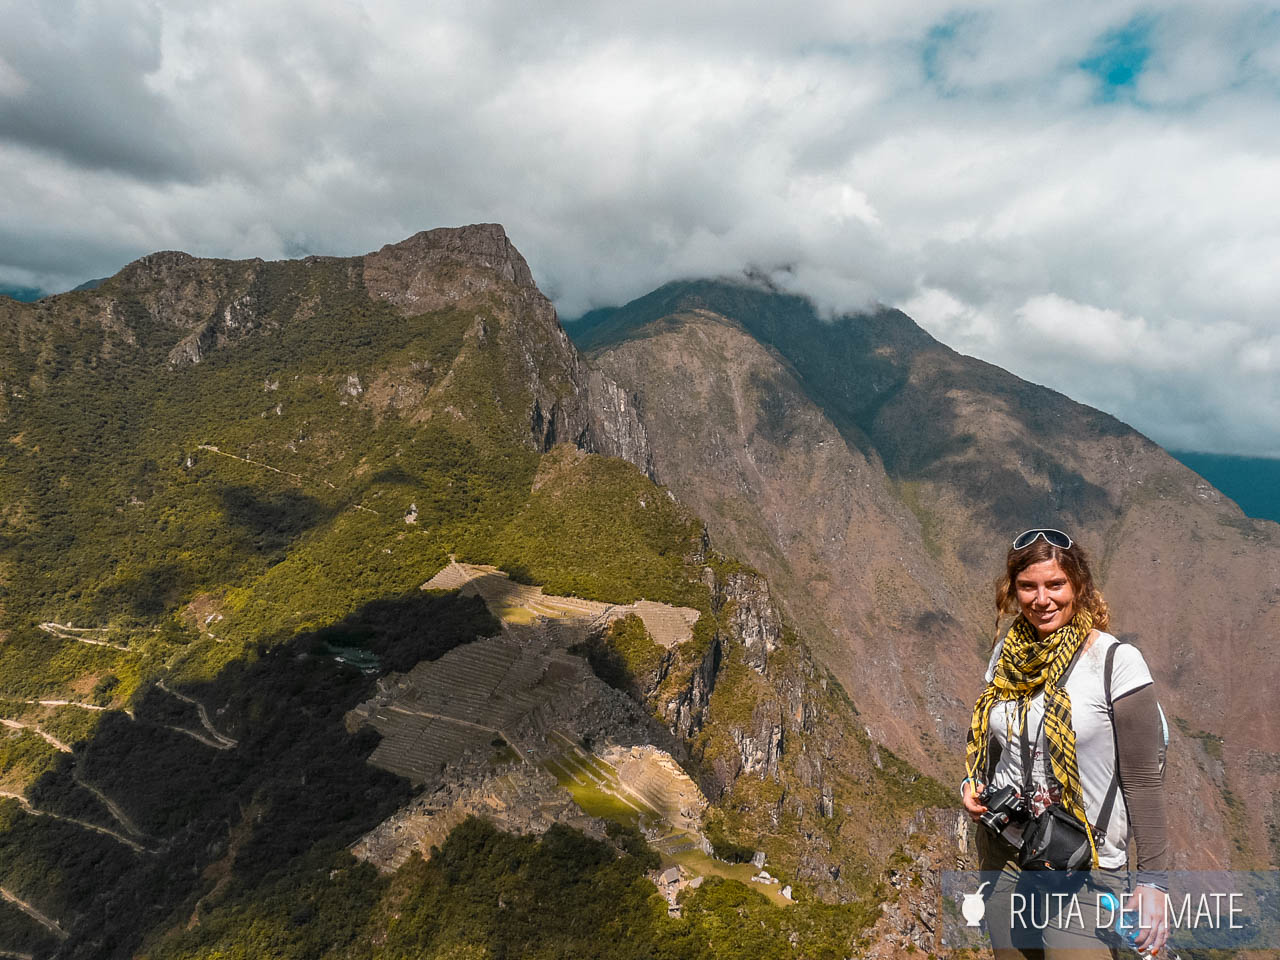 The views from Huayna Picchu